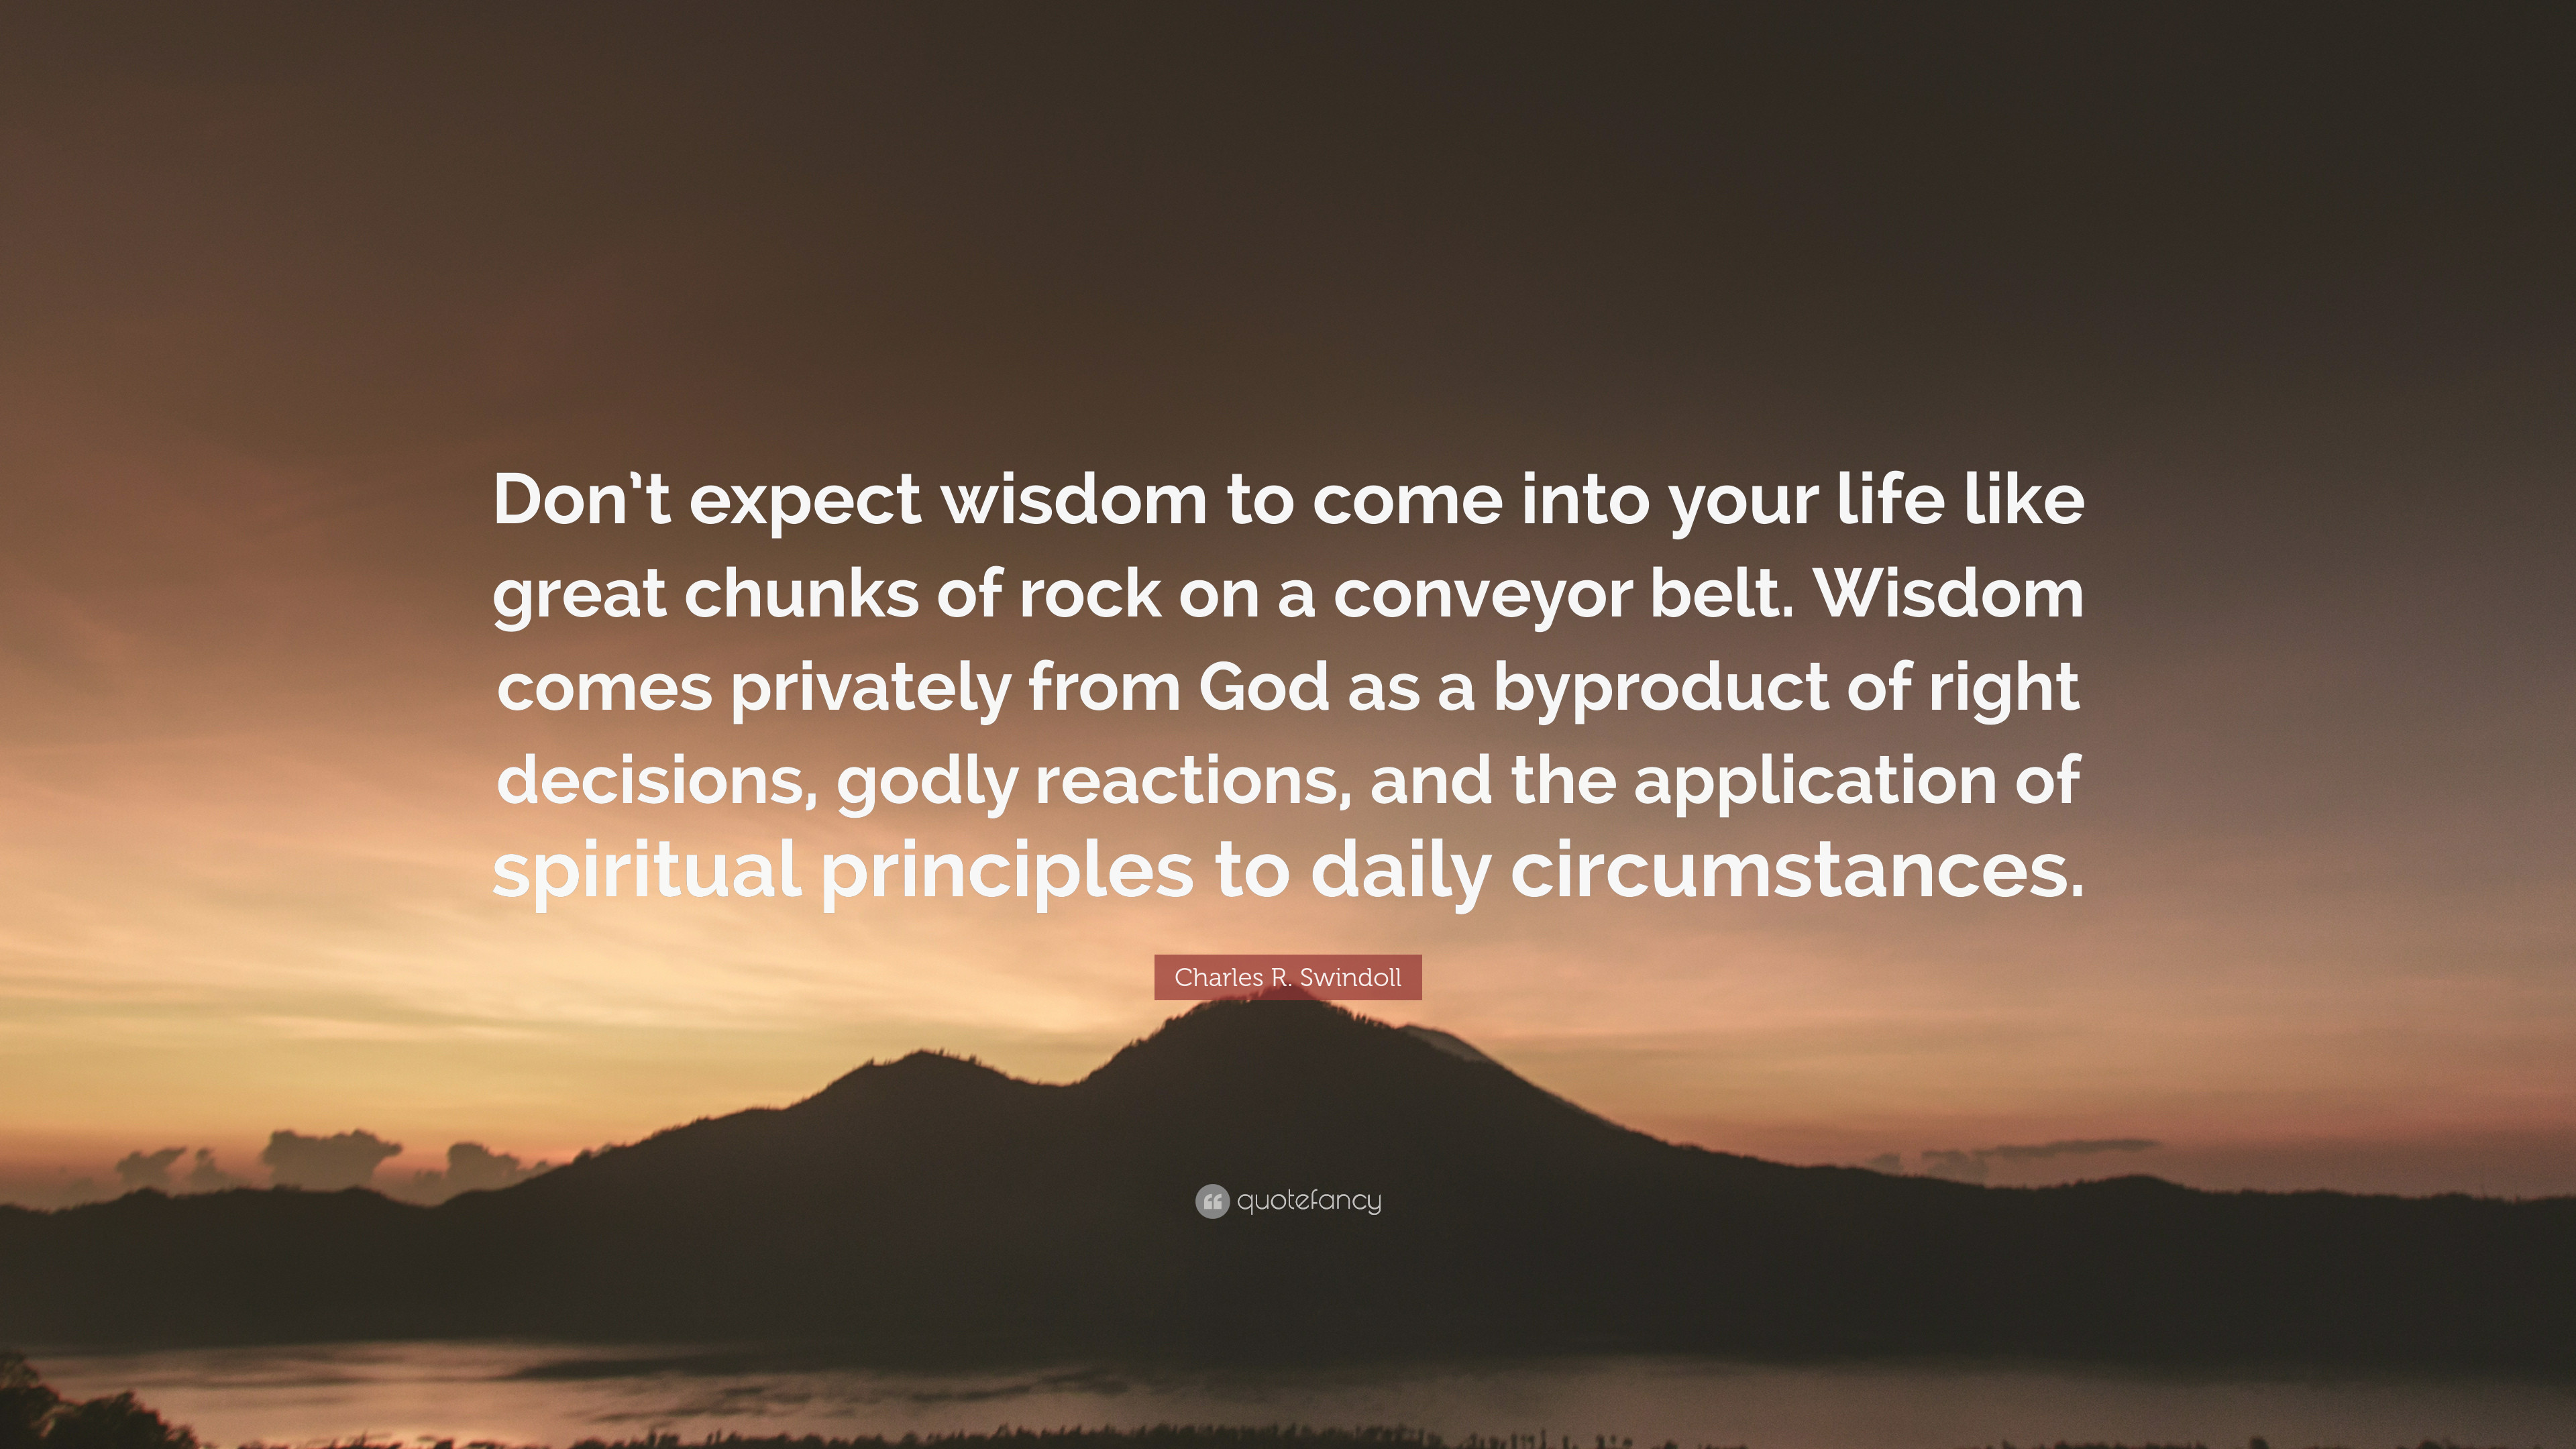 3840x2160 Charles R. Swindoll Quote: “Don't expect wisdom to come into your